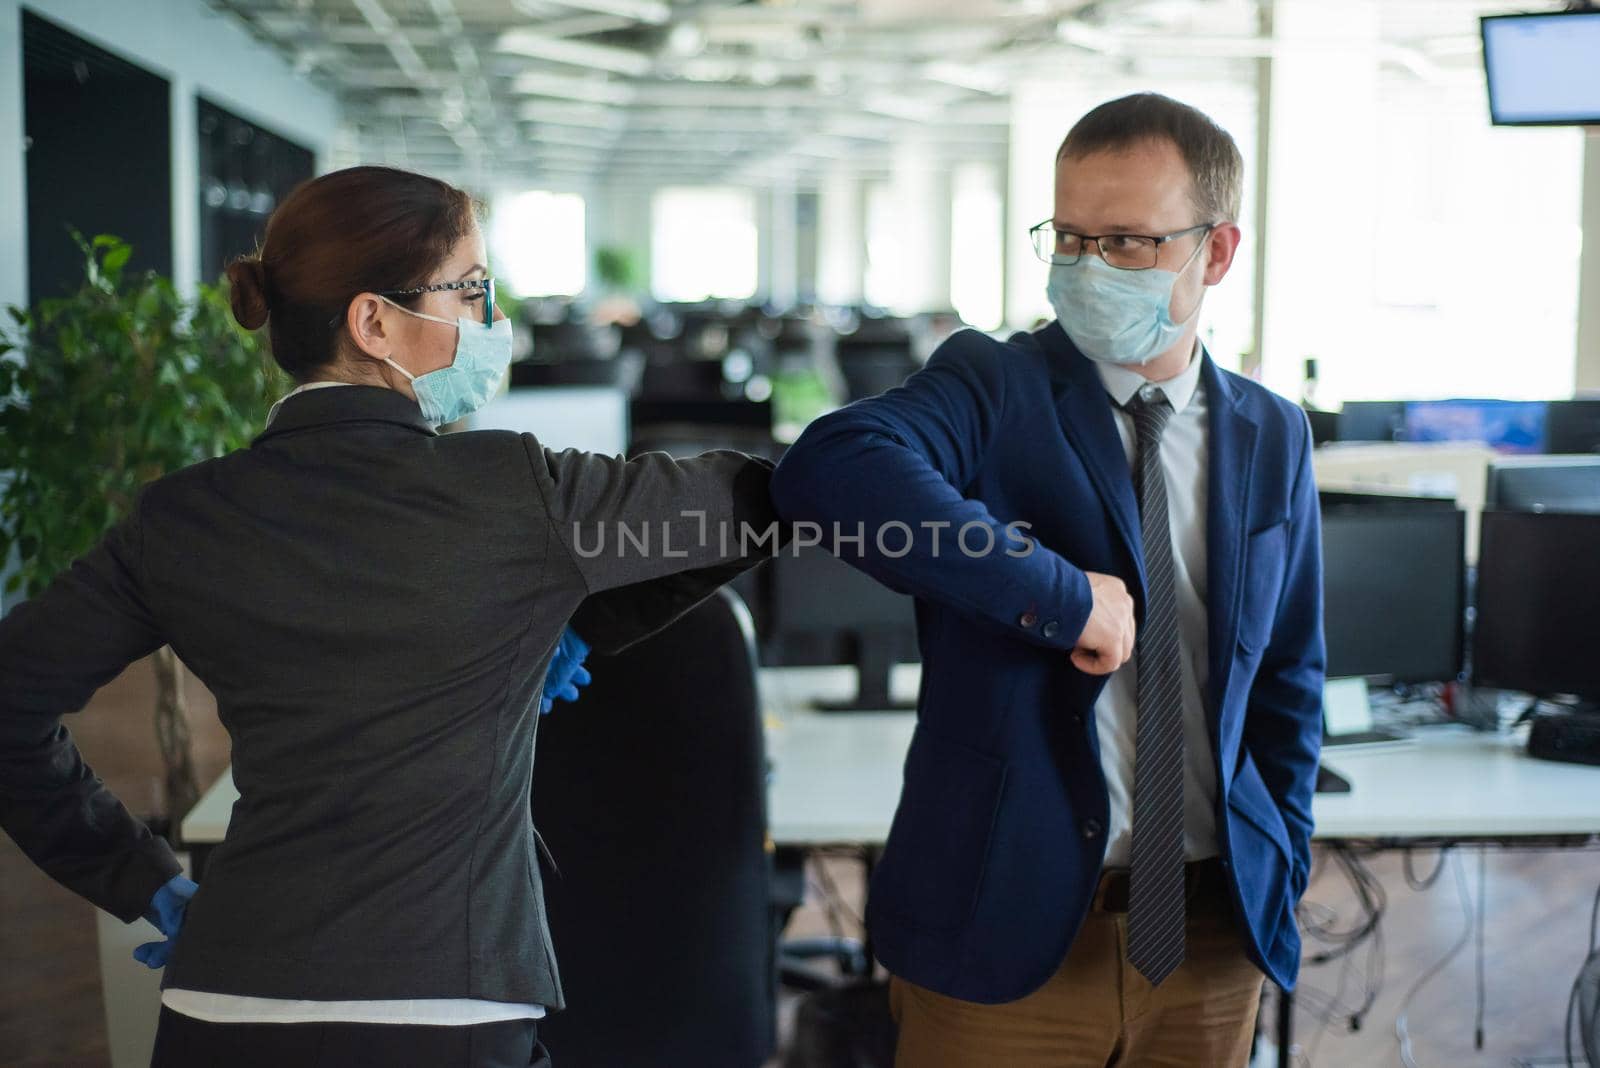 Office workers shake hands when meeting and greet bumping elbows. A new way to greet the obstructing spread of coronavirus. Man and woman in protective masks maintain a social distance at work. by mrwed54